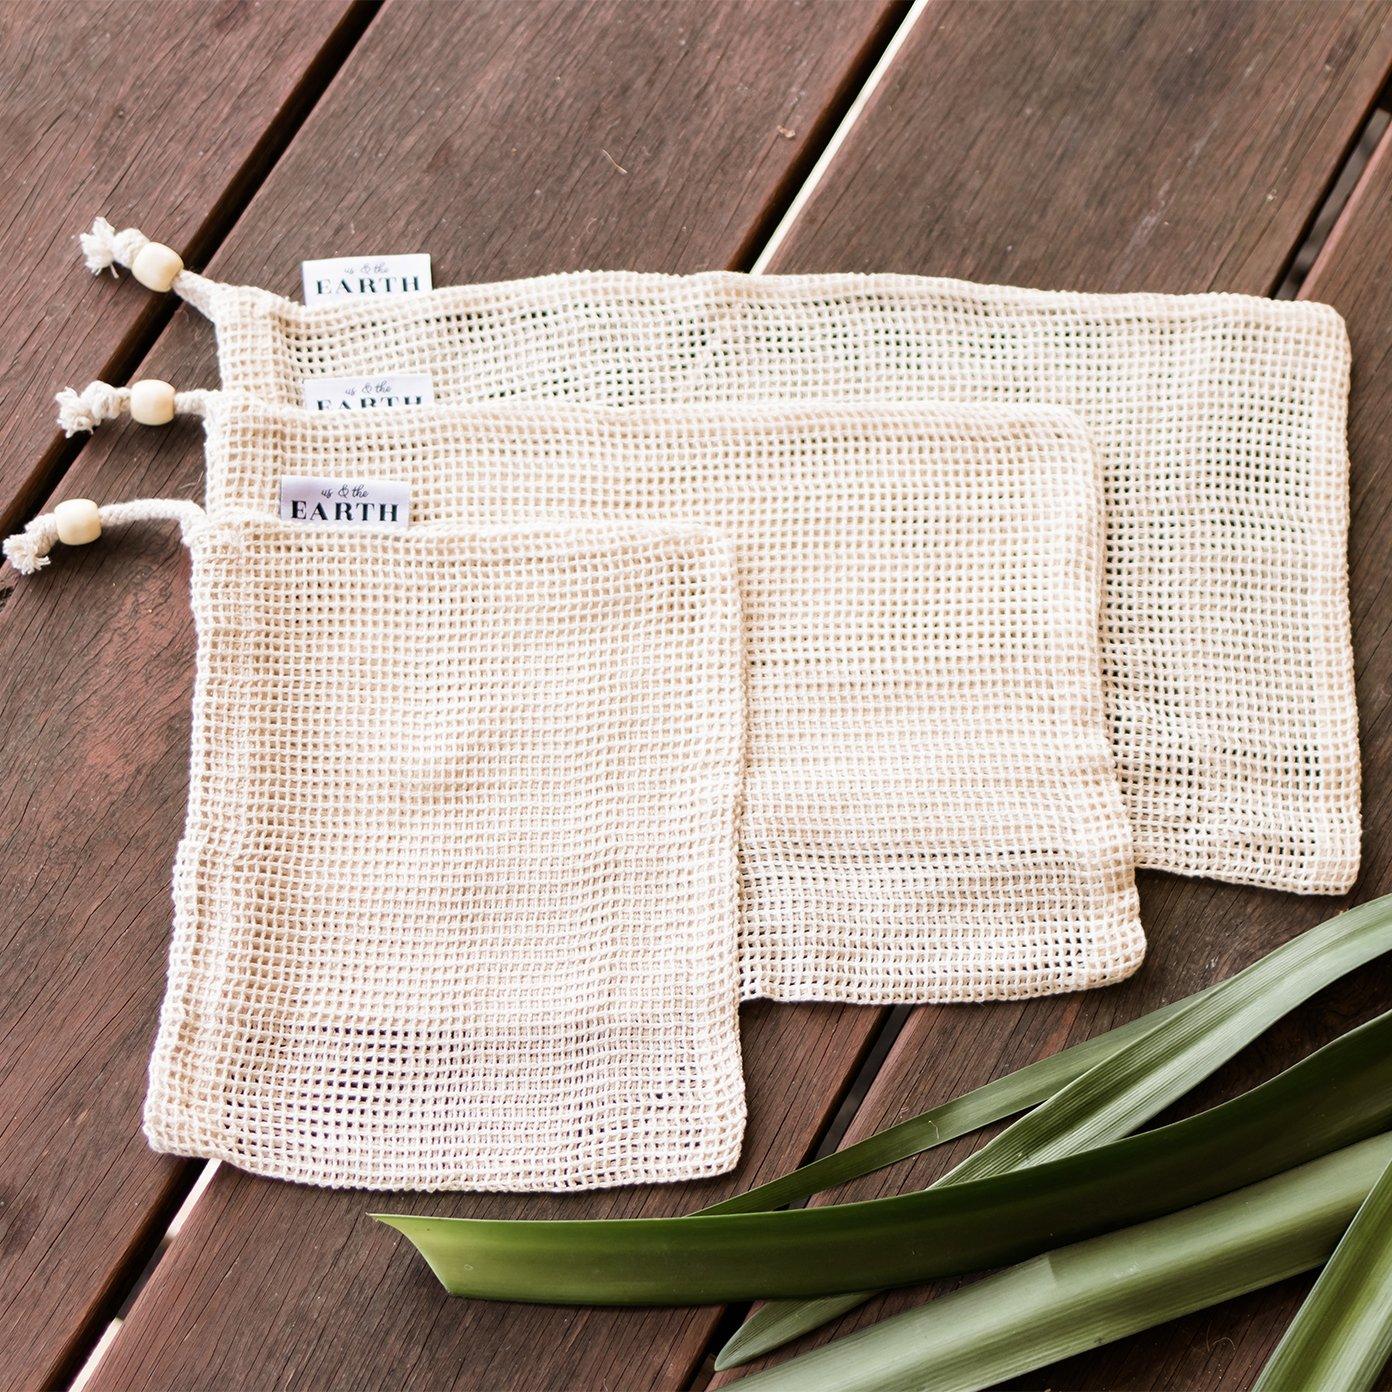 100% Organic Cotton Open Weave Reusable Vegetable Bag - Set of 3Sustainable Kitchen - Us and the Earth